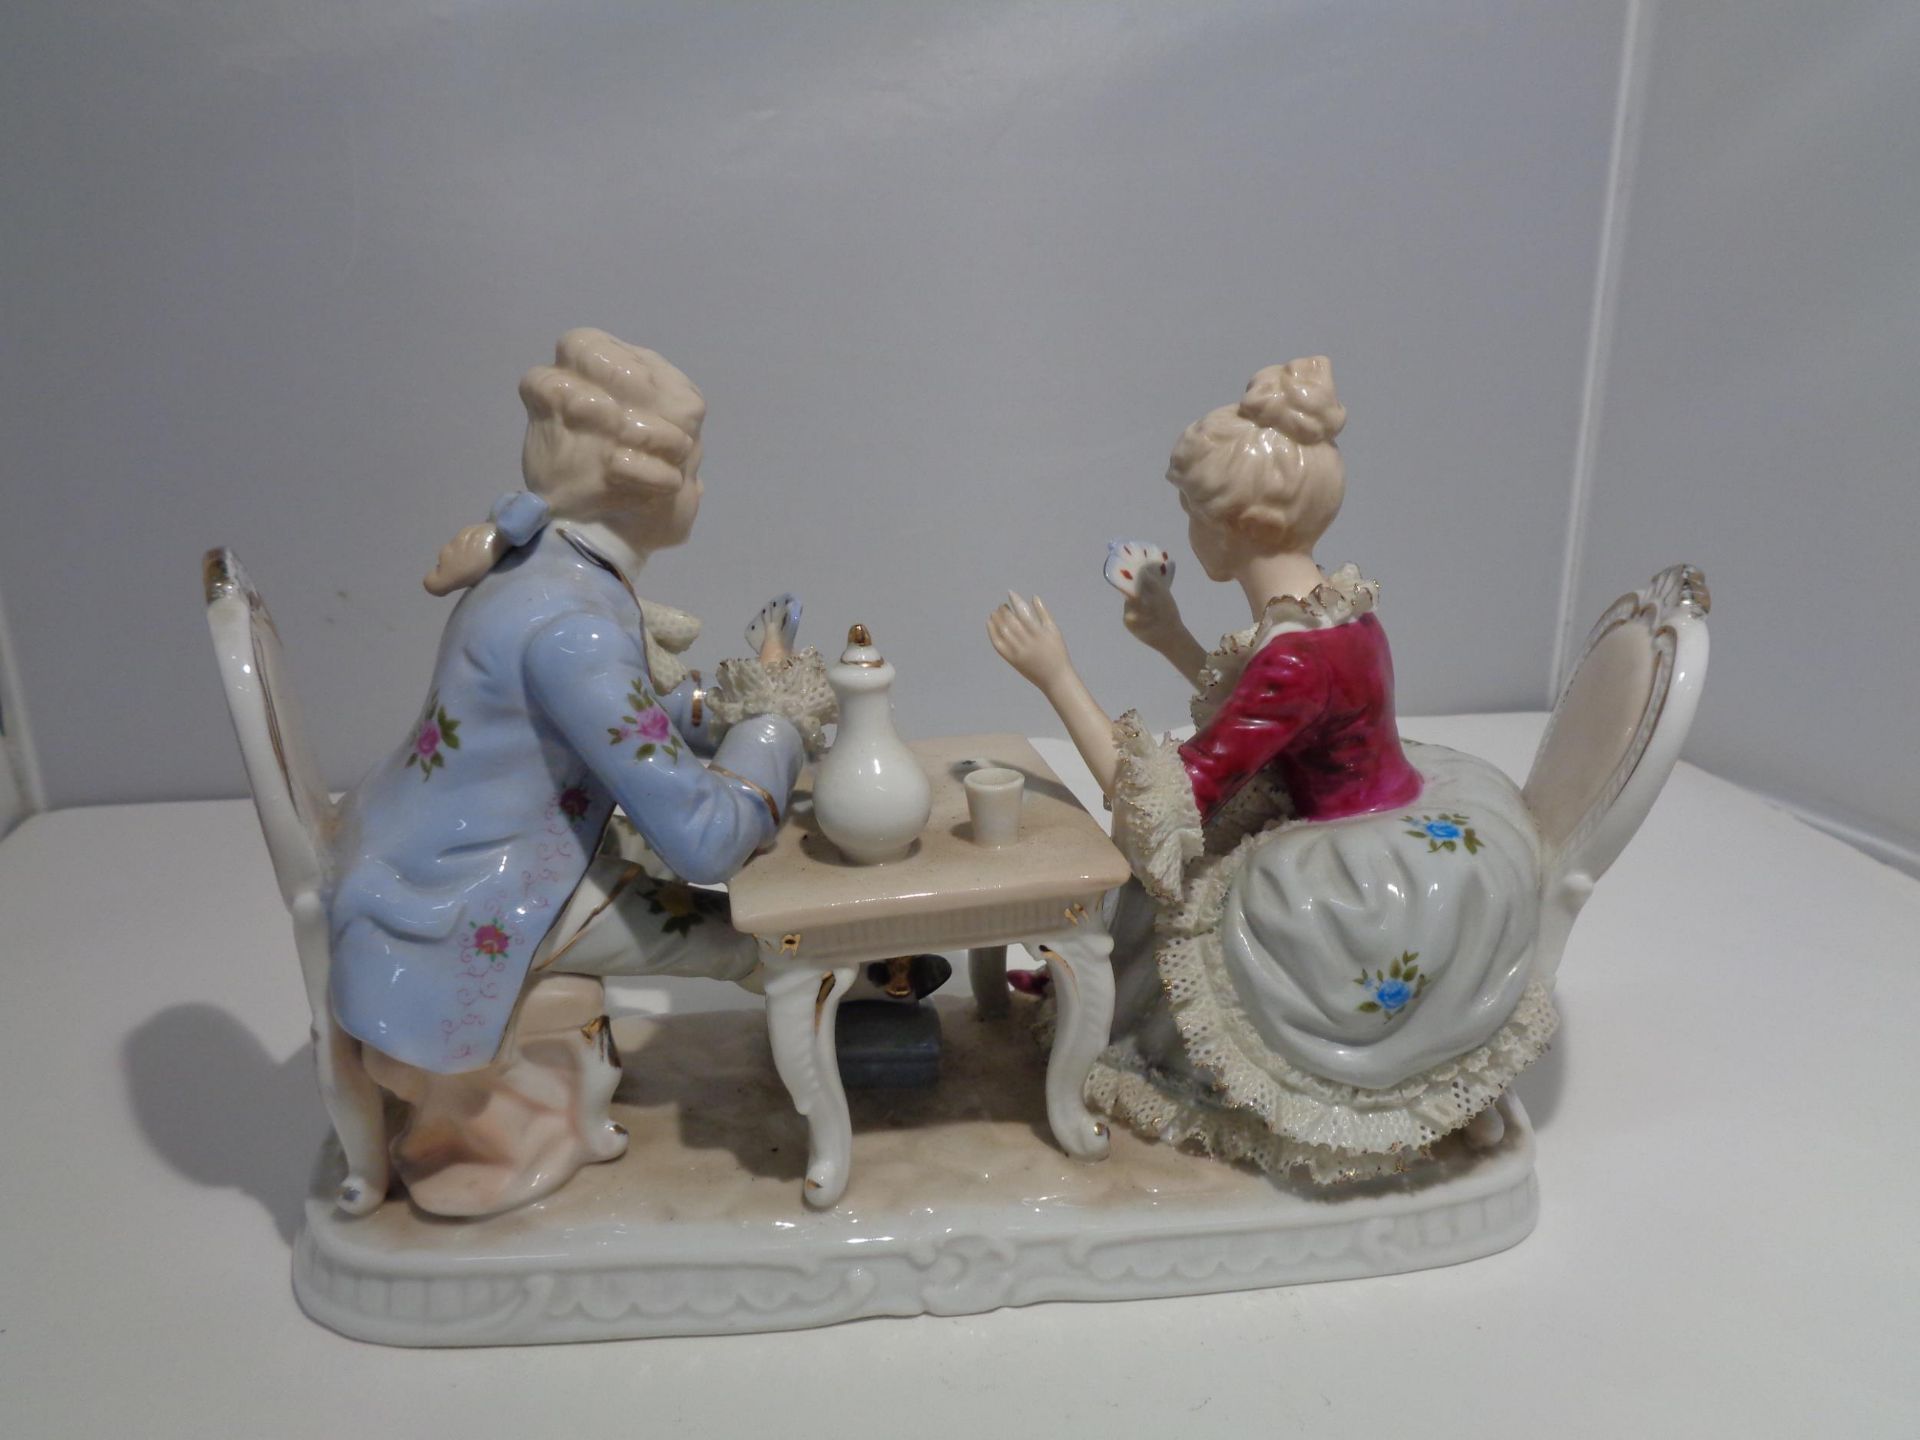 A VICTORIAN DRESDEN DOUBLE FIGURE OF A LADY AND GENT PLAYING CARDS - Image 2 of 2